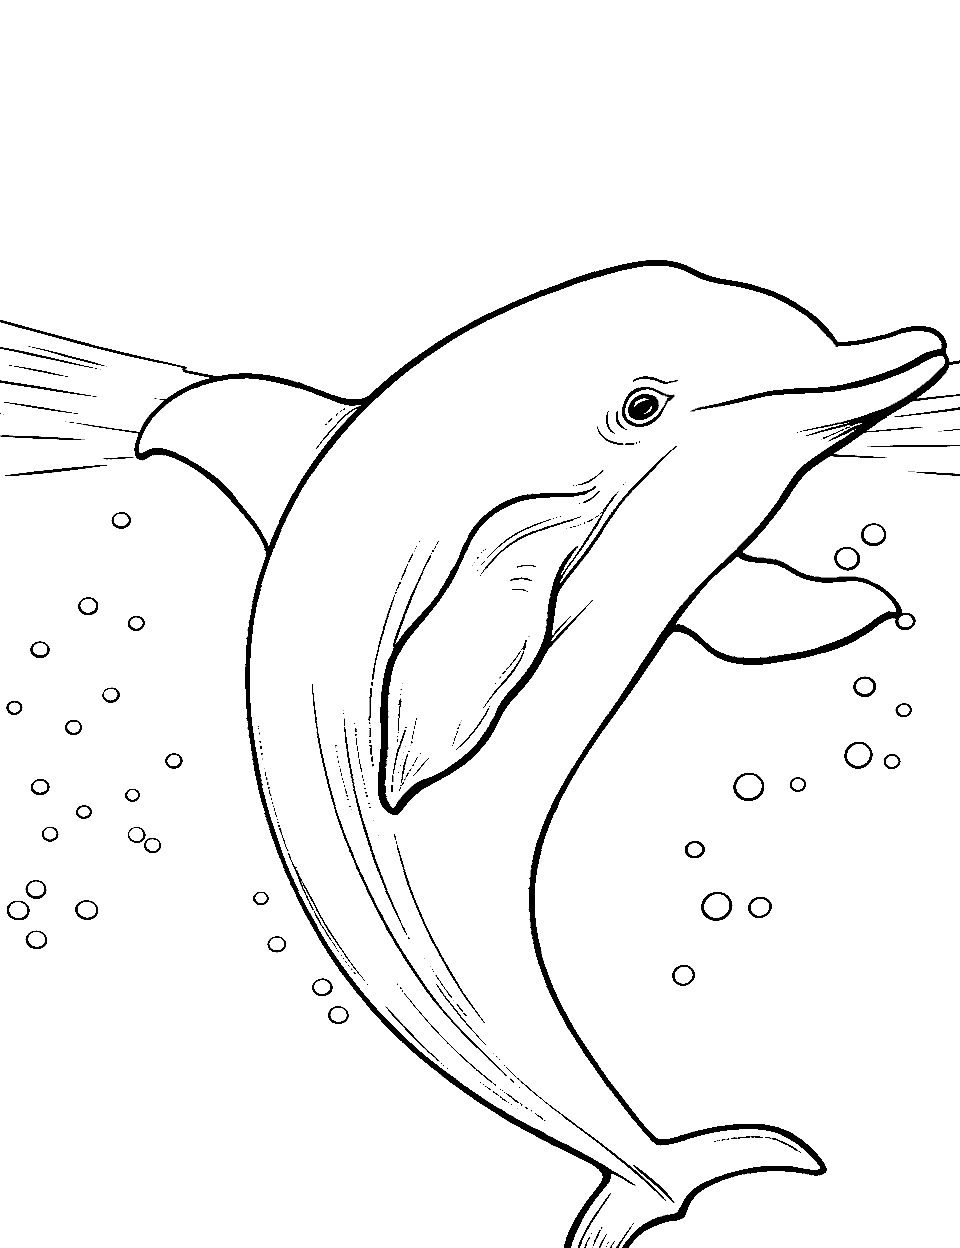 Dolphin Surfacing Ocean Coloring Page - A lone dolphin slightly peeking from the ocean surface to recon the surroundings.